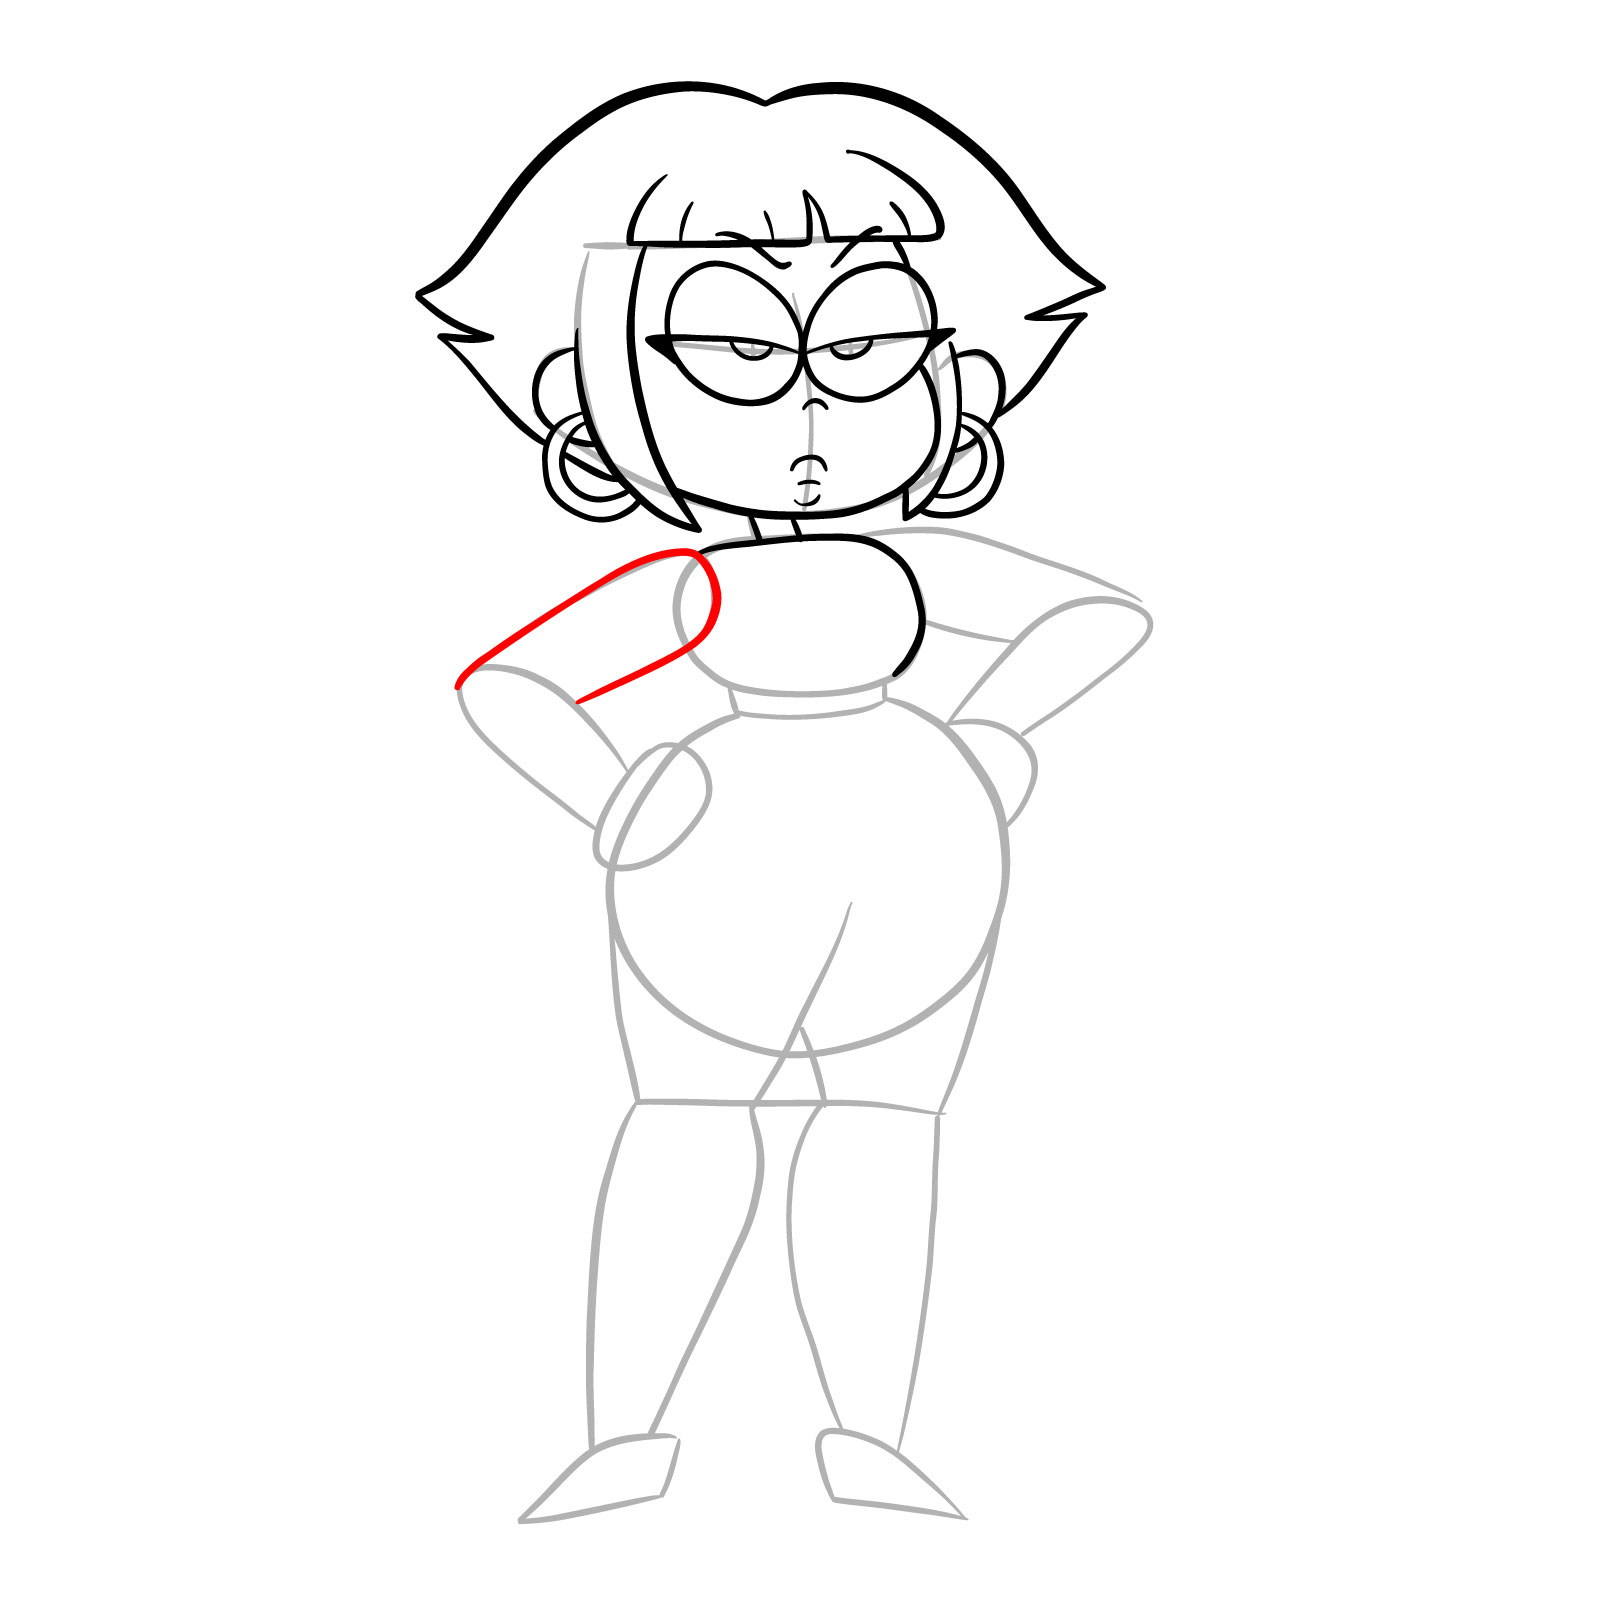 How to draw Human Shannon from OK K.O.! - step 15